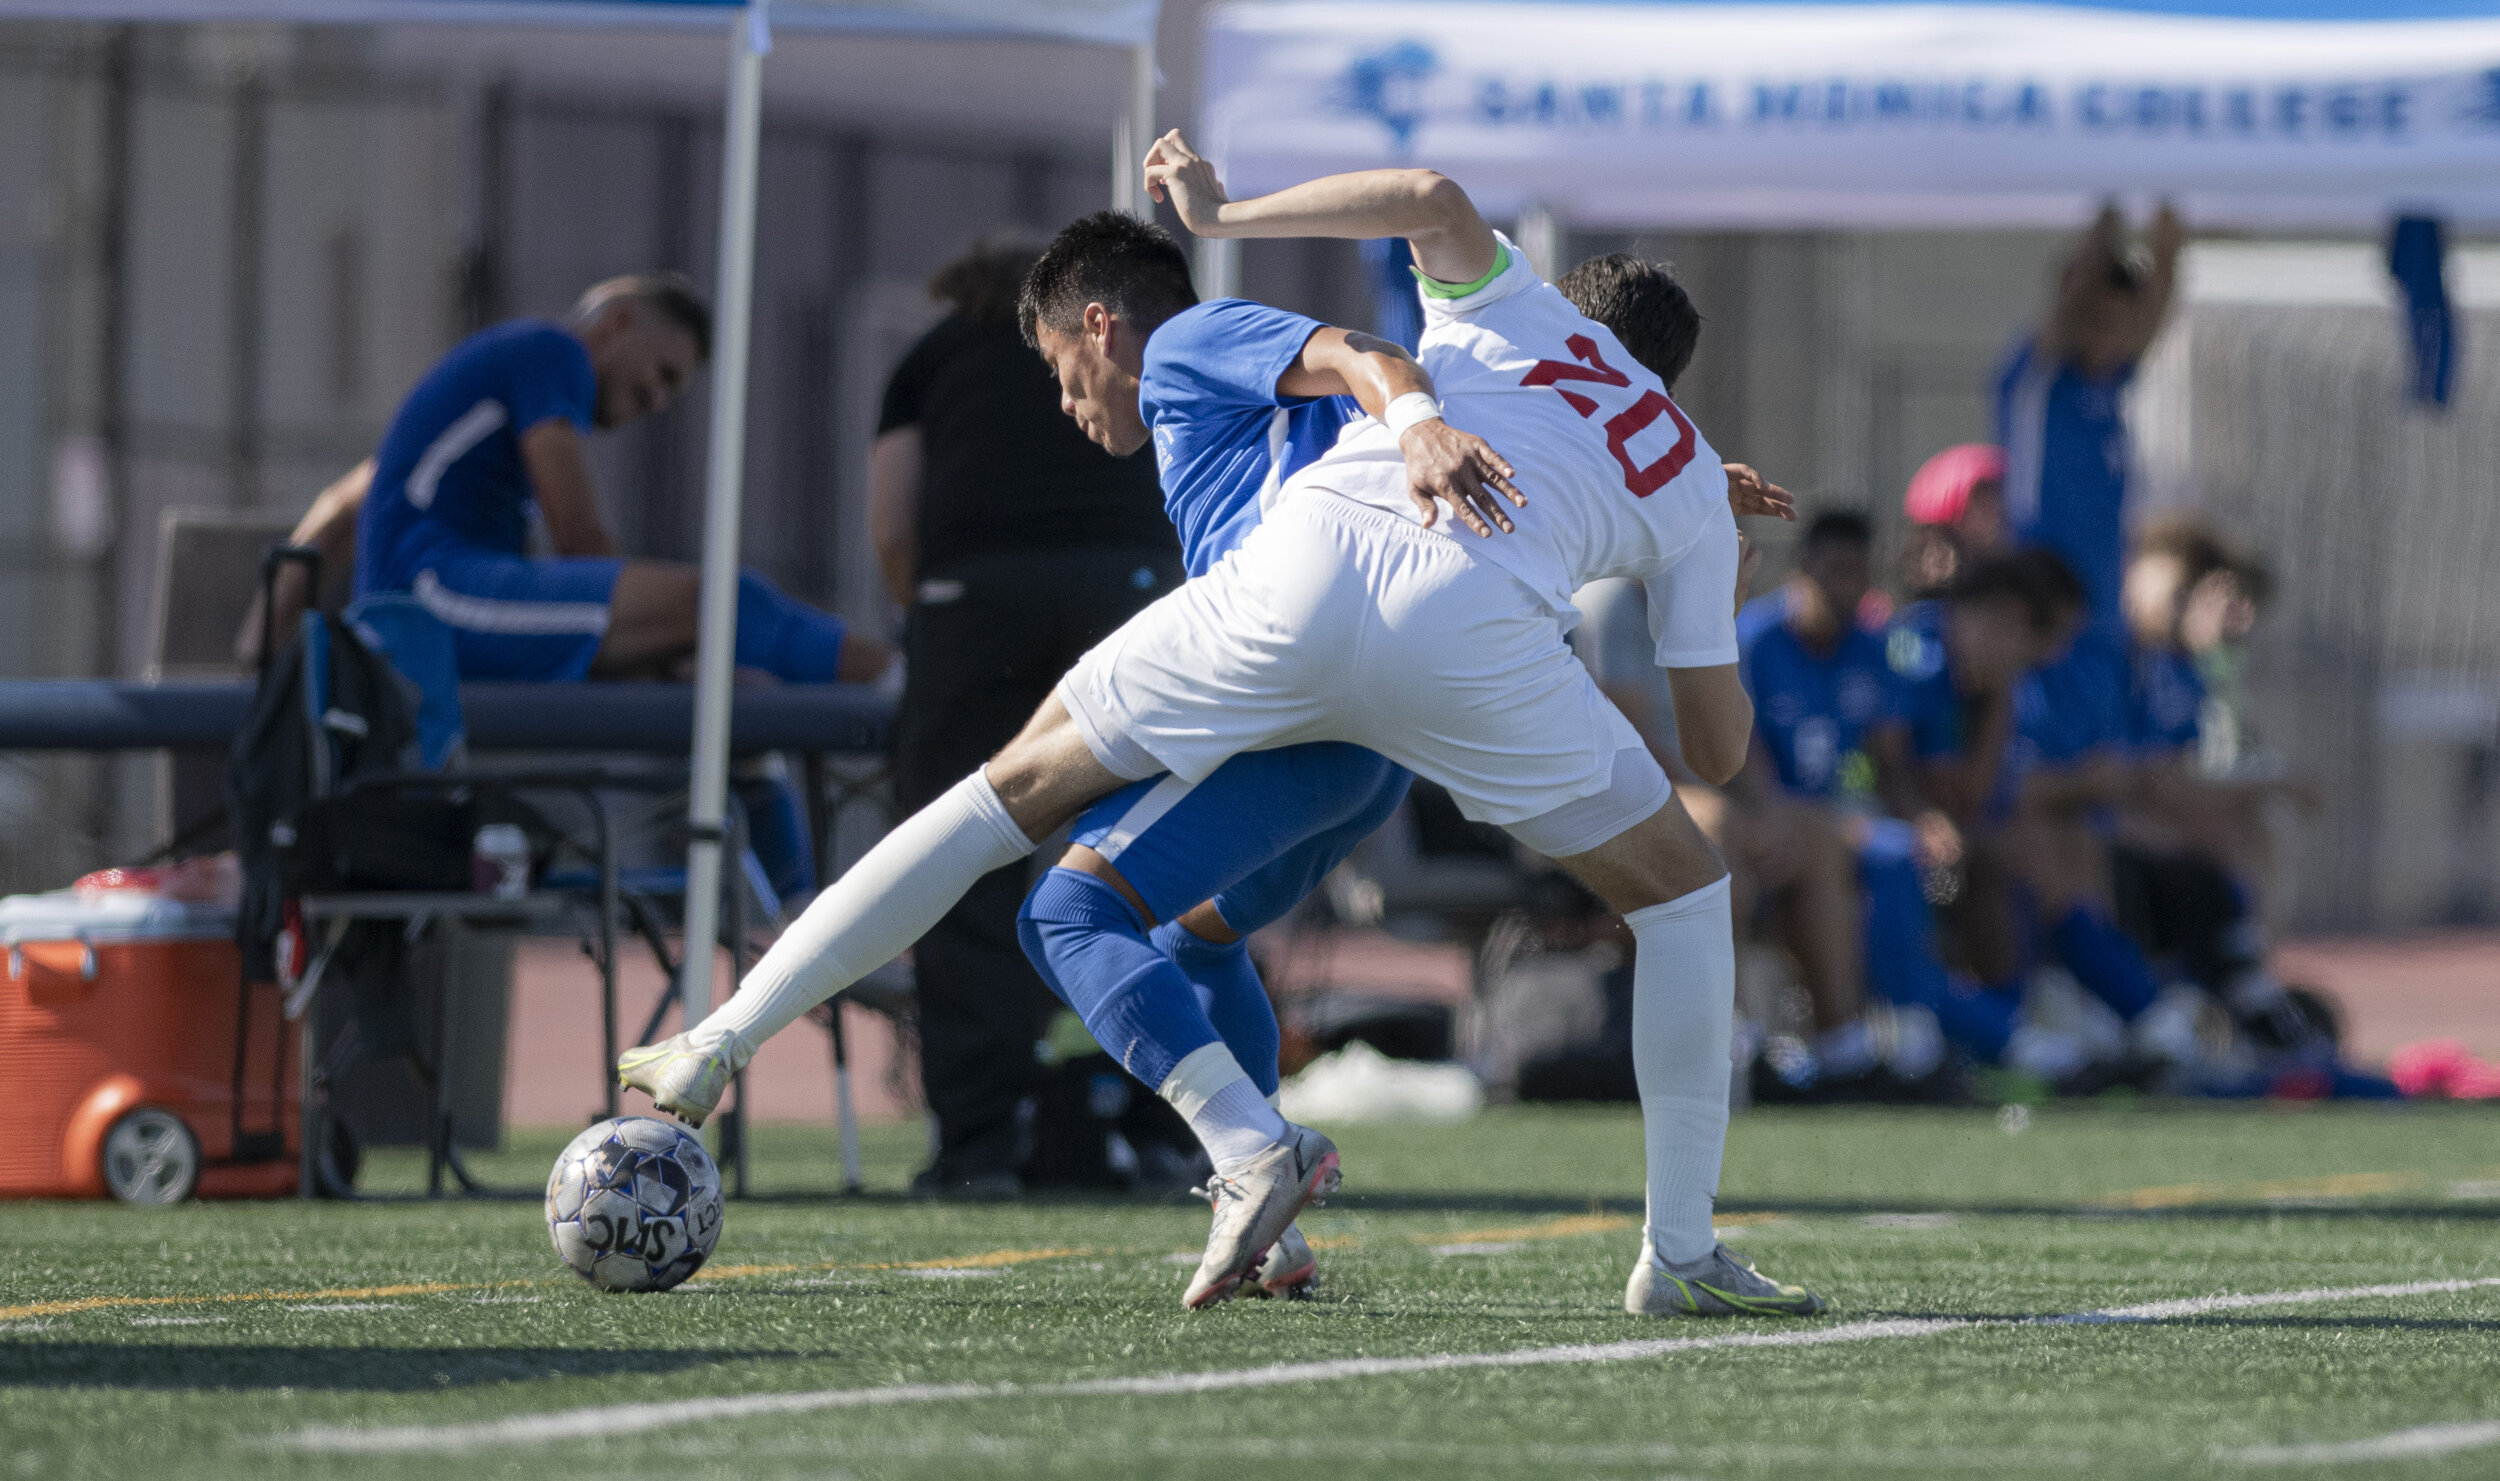  Santa Monica College Corsairs freshman Denilson Garcia (11) holds off a Bakersfield defender as he attempts to take the ball while an injured player sits in the background. (Jon Putman | The Corsair) 